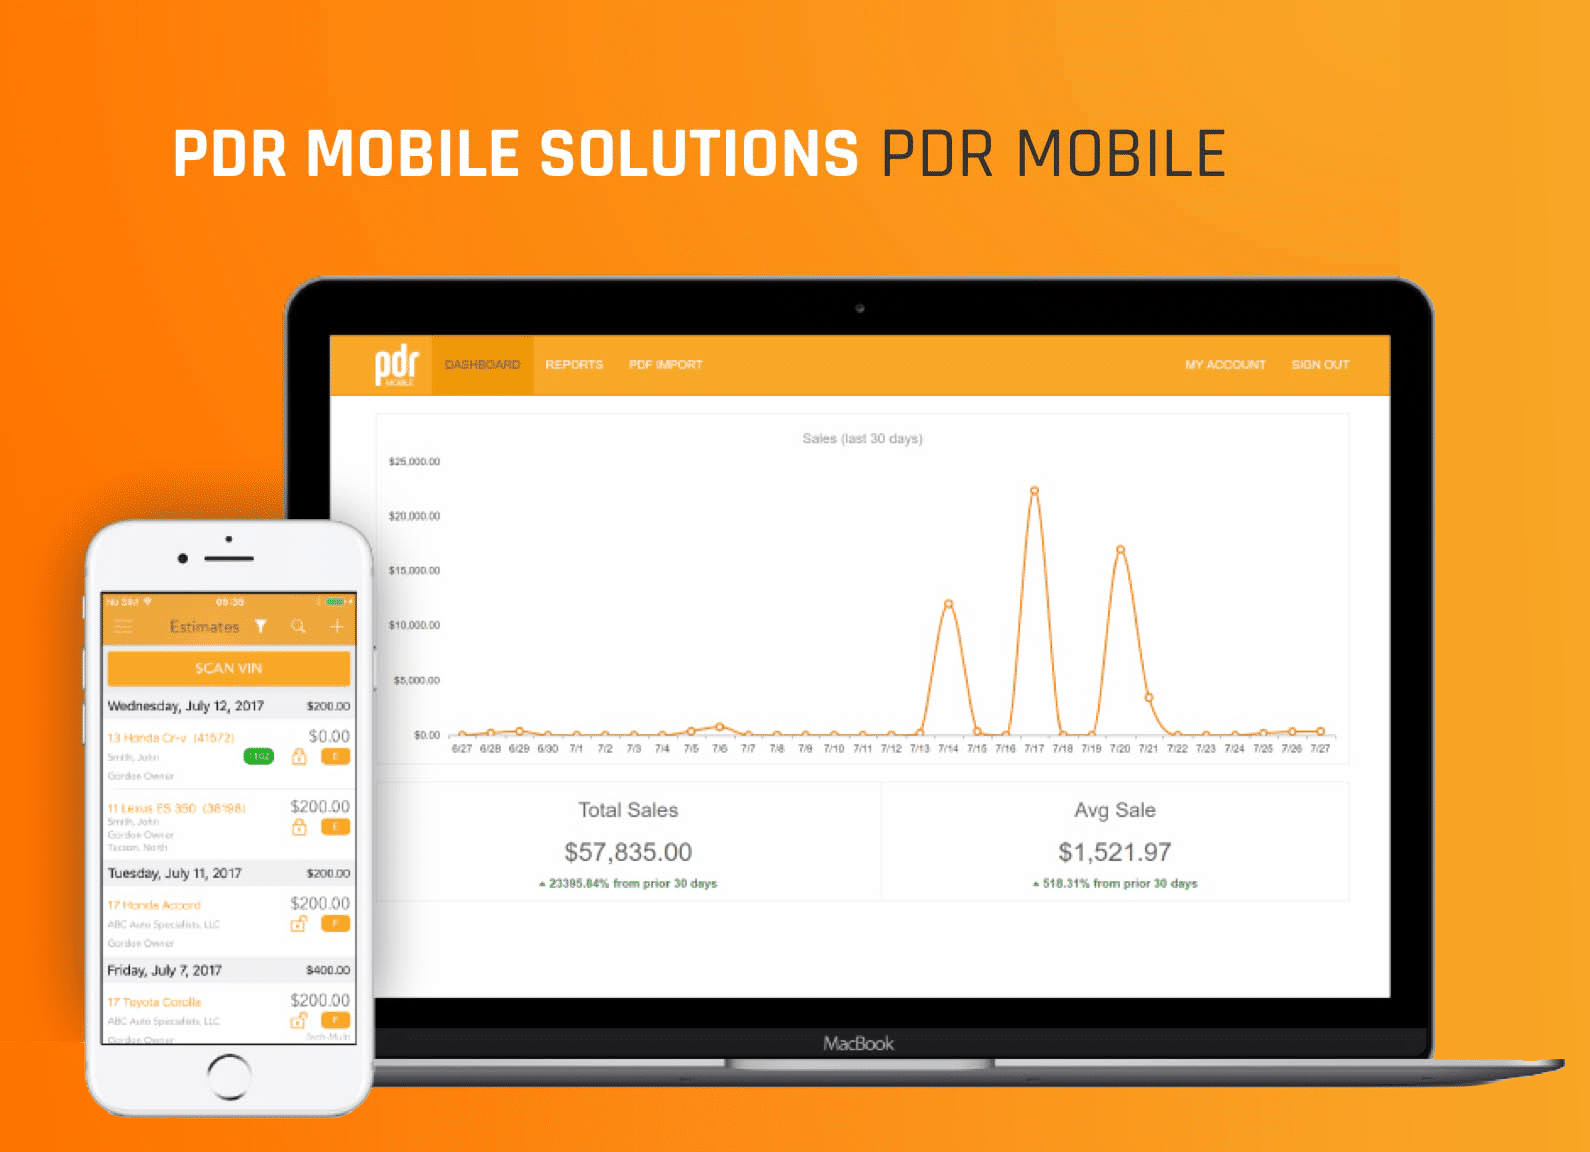 PDR Mobile Solutions - PDR Mobile